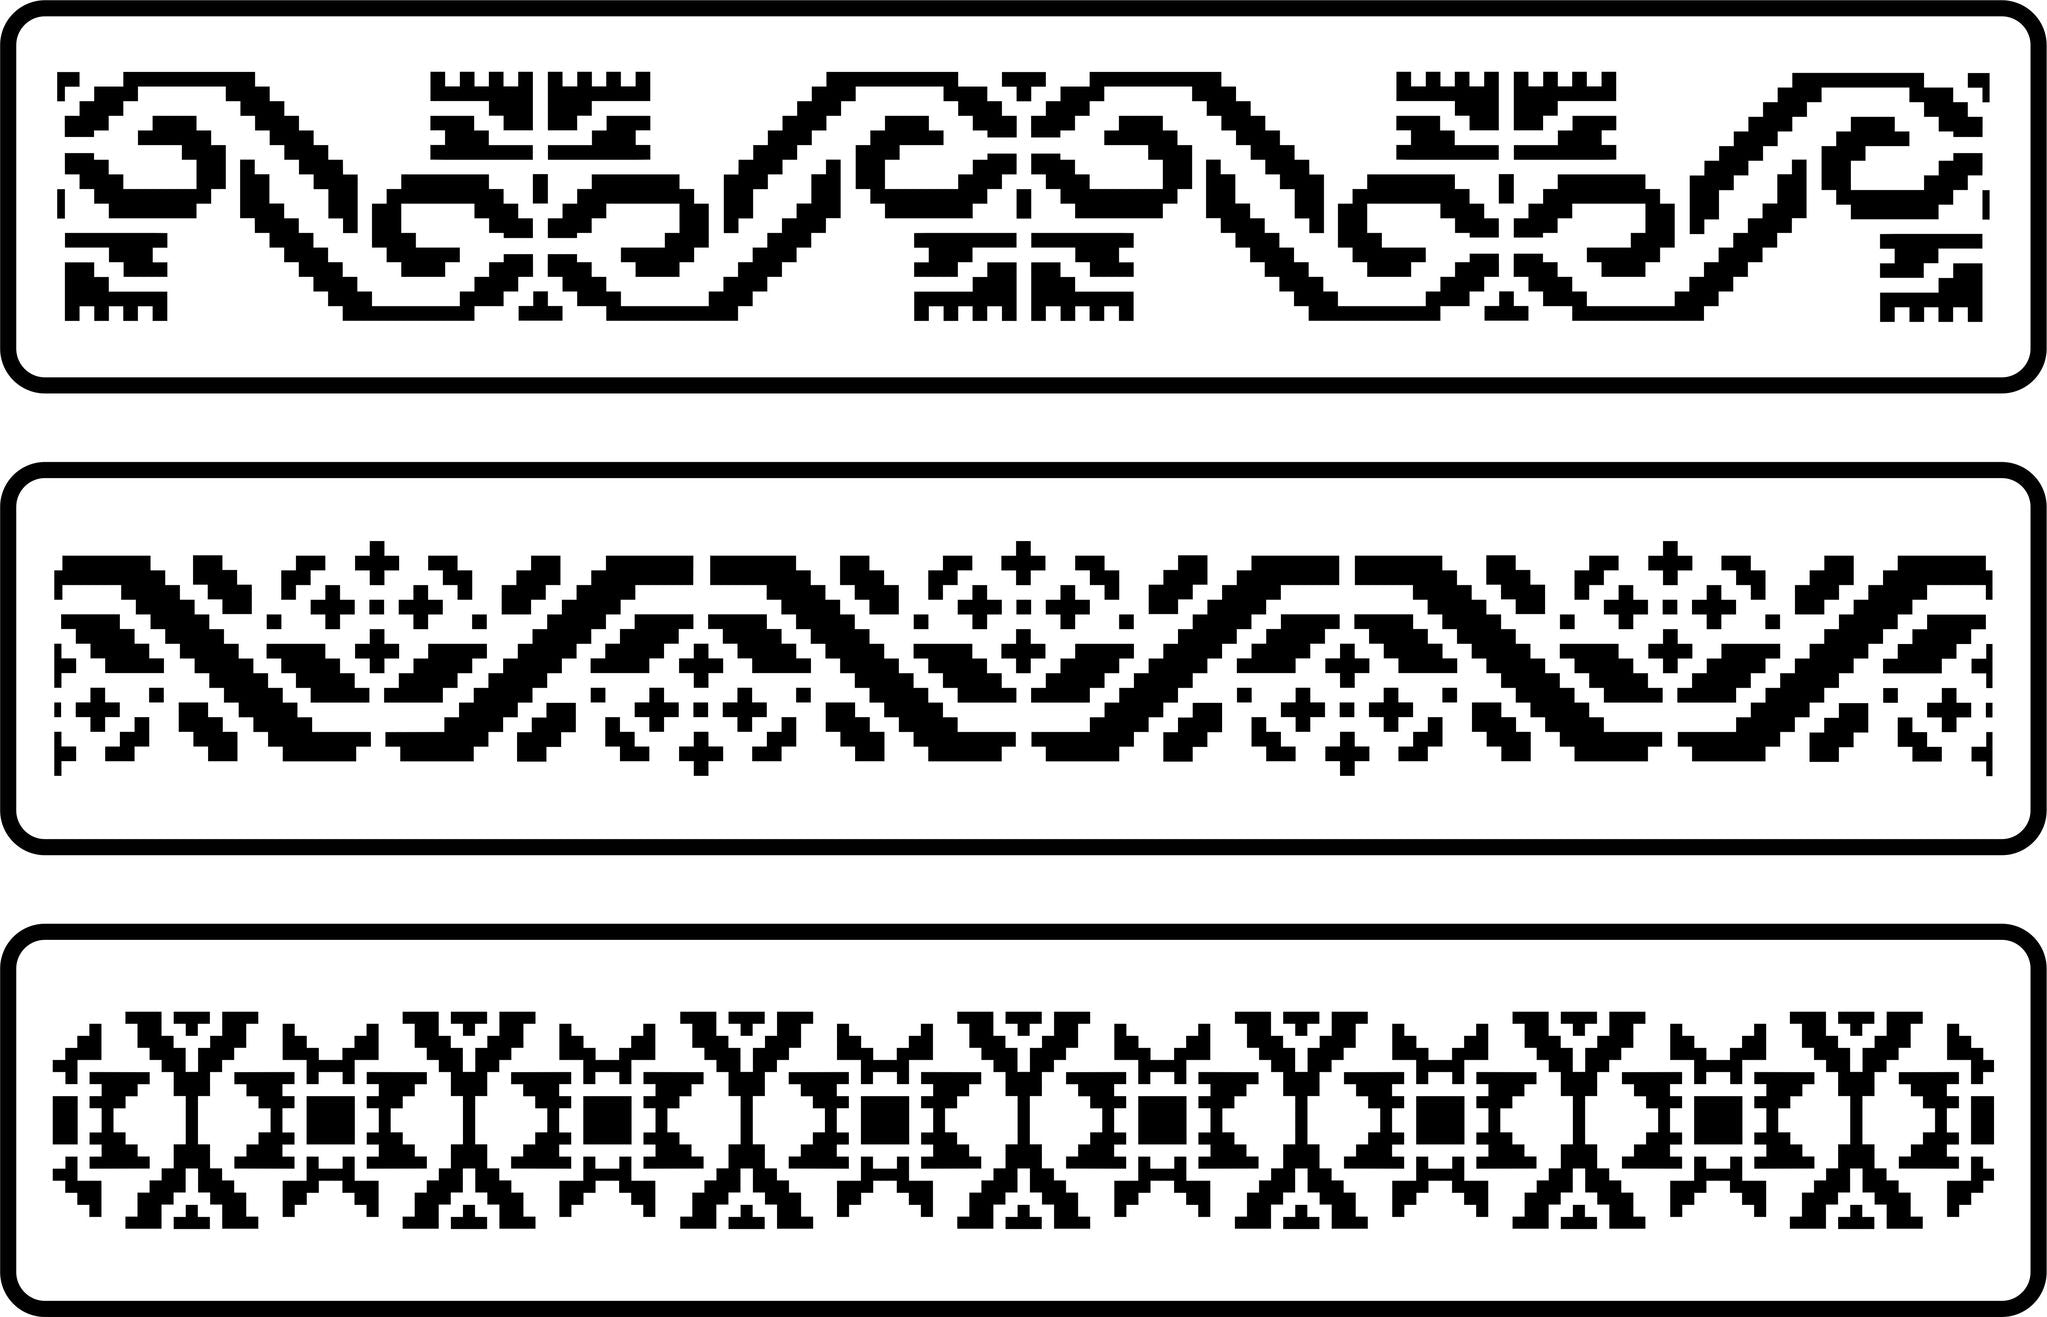 Mexican Embroidery Set JRV Stencils